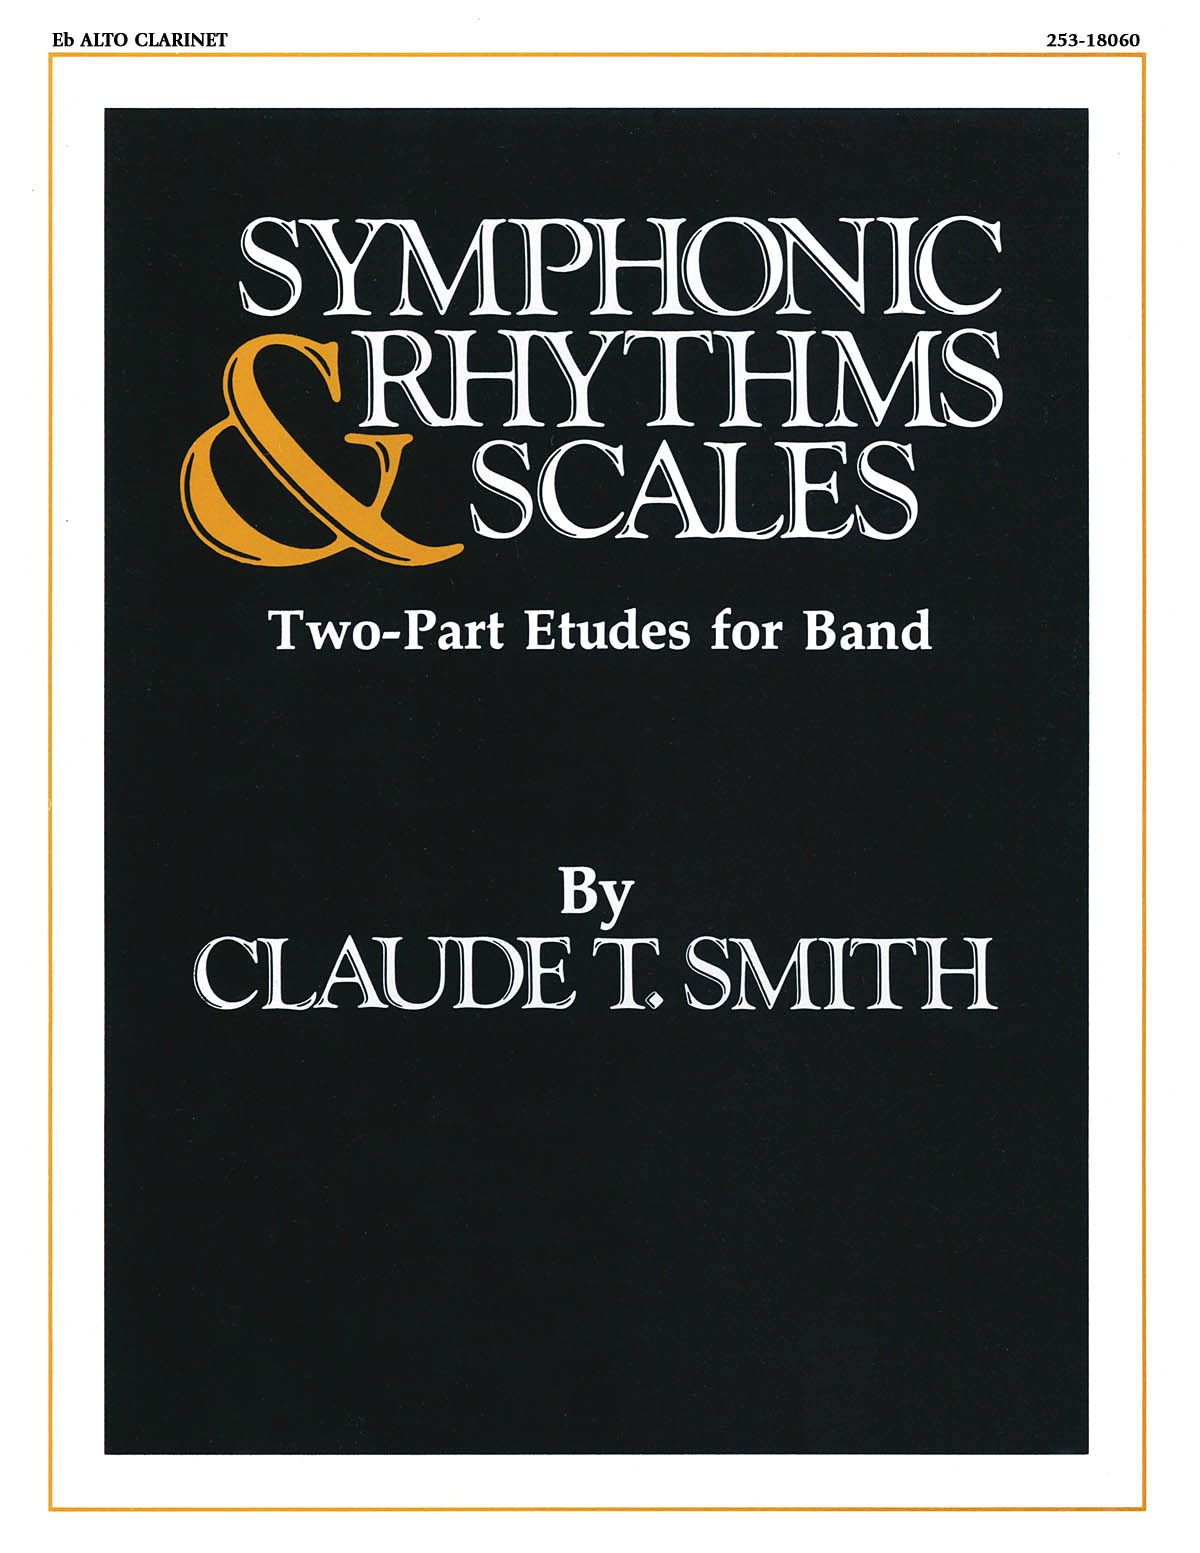 Symphonic Rhythms & Scales(Two-Part Etudes For Band and Orchestra Eb Alto Clarinet)